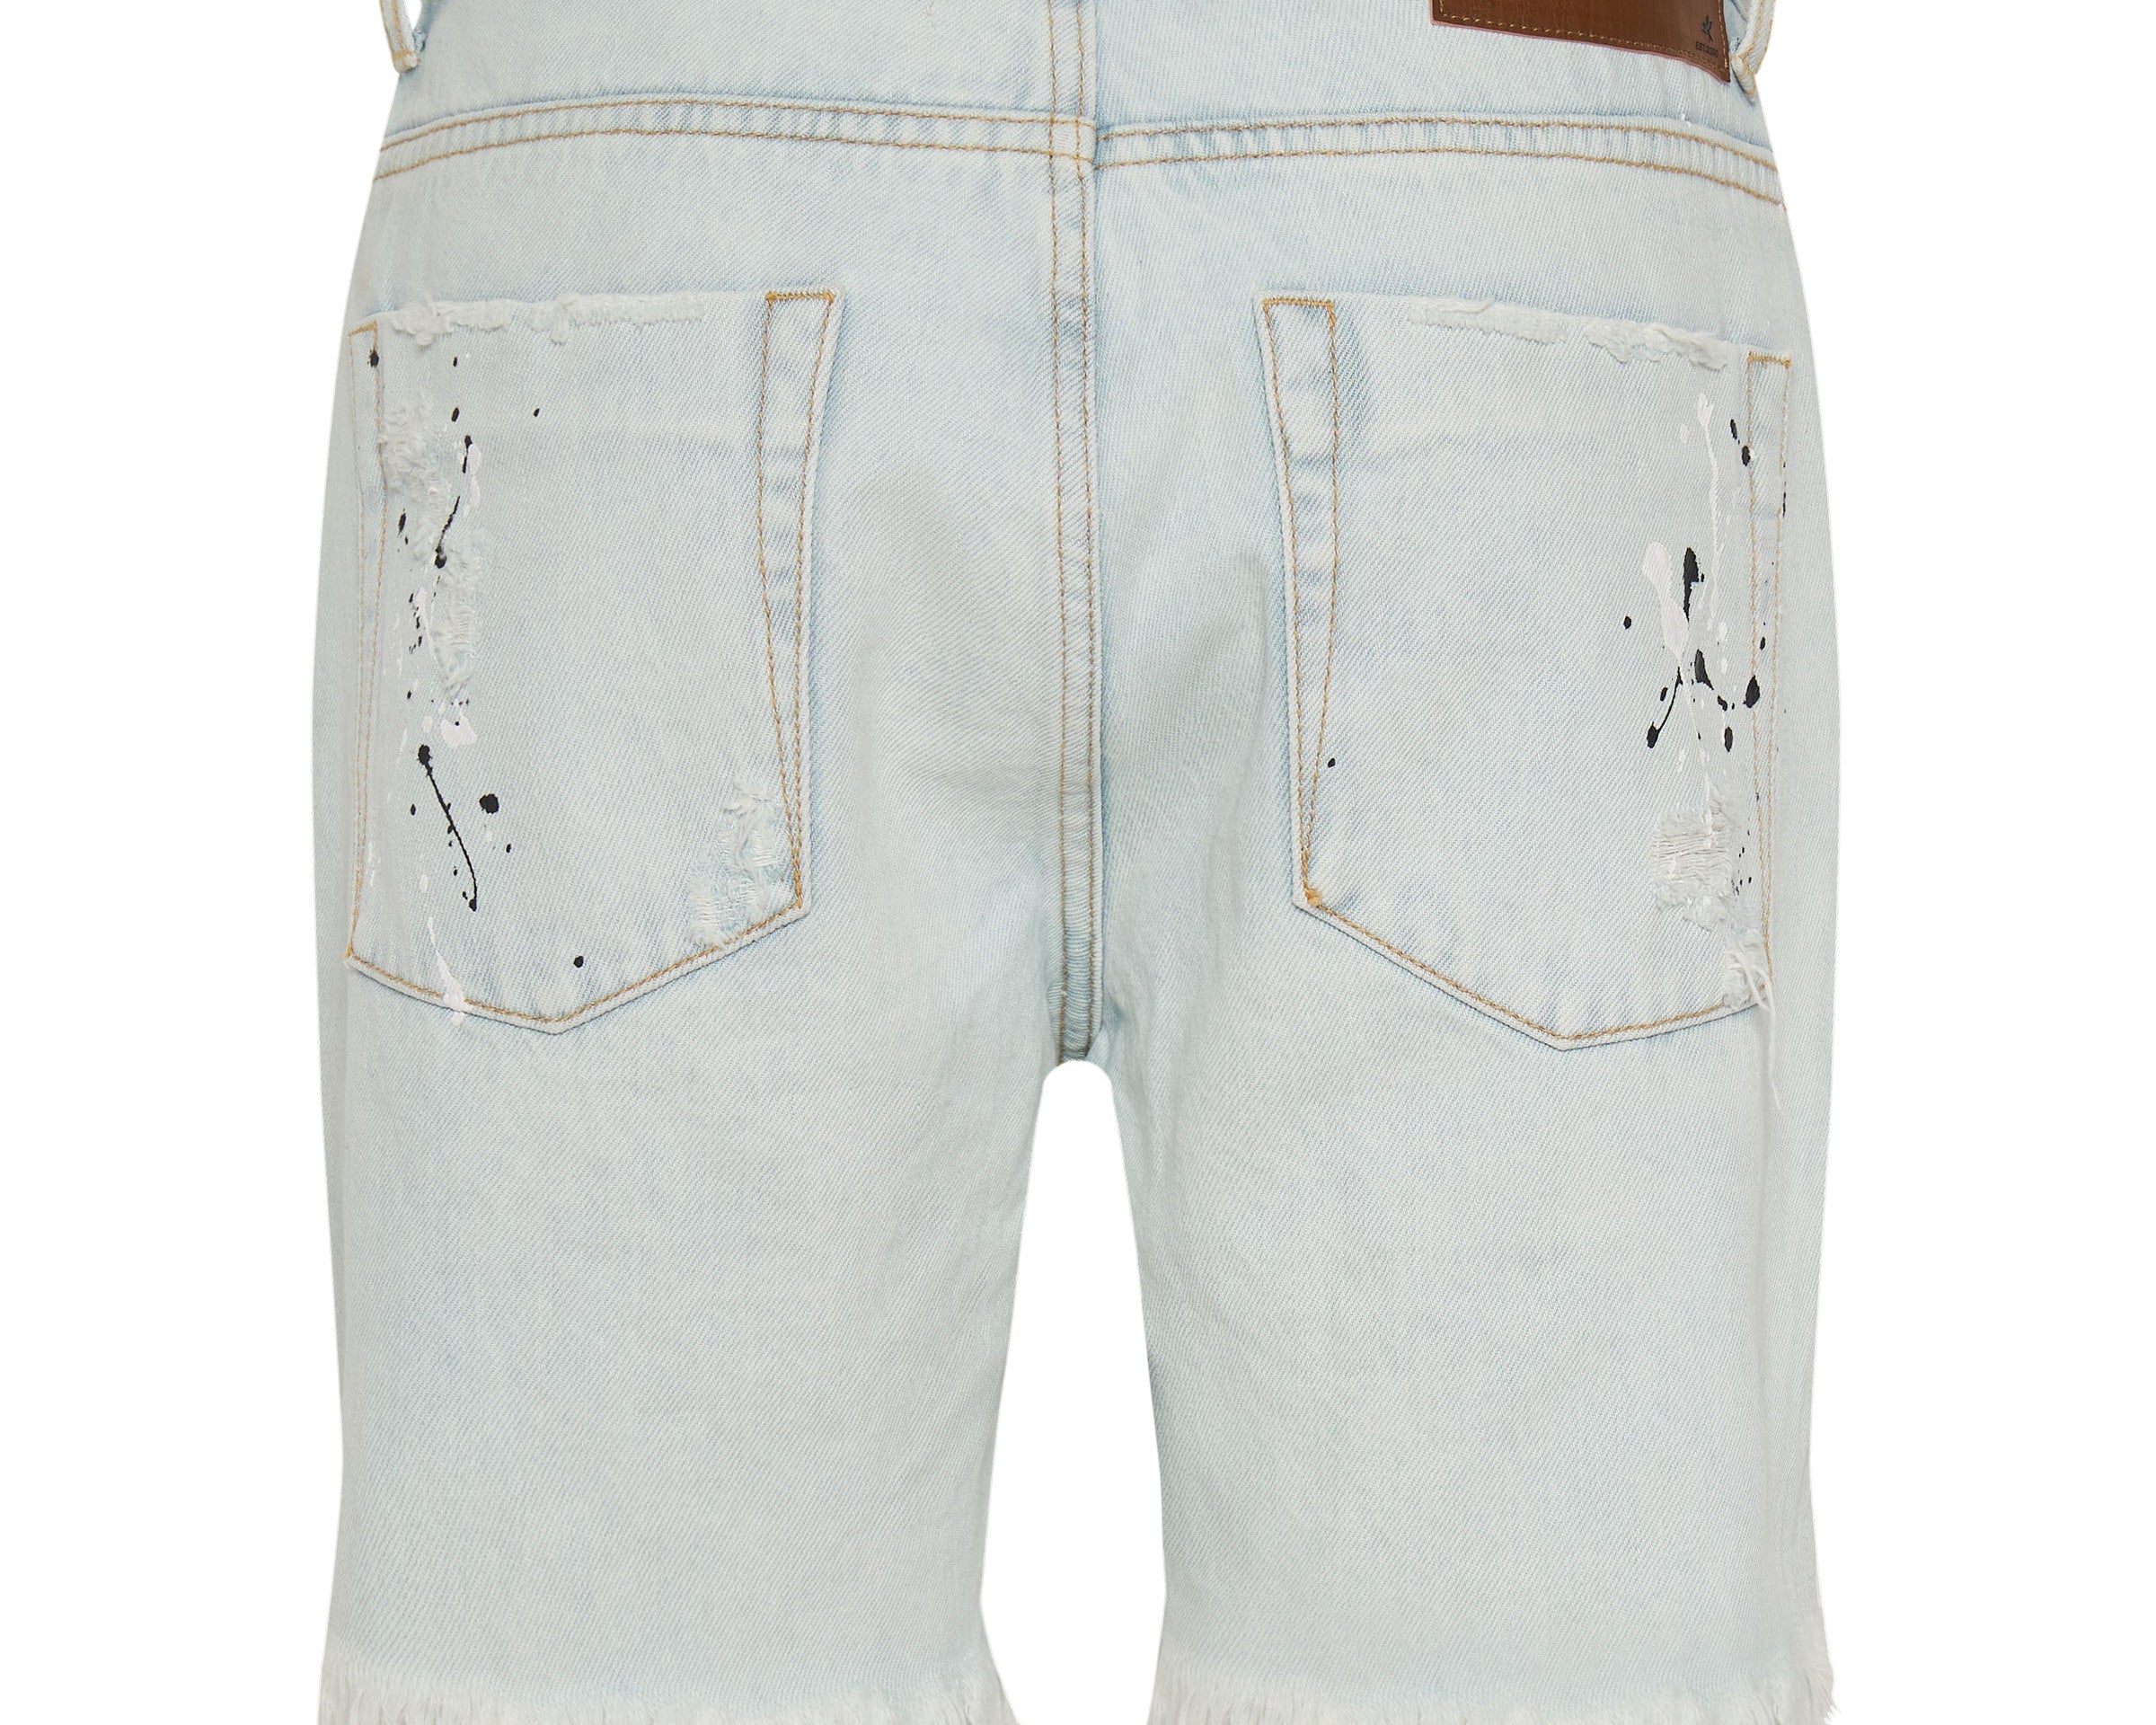 FLORENCE PAINTED STEVIES LONG LENGTH BOYFRIEND SHORTS